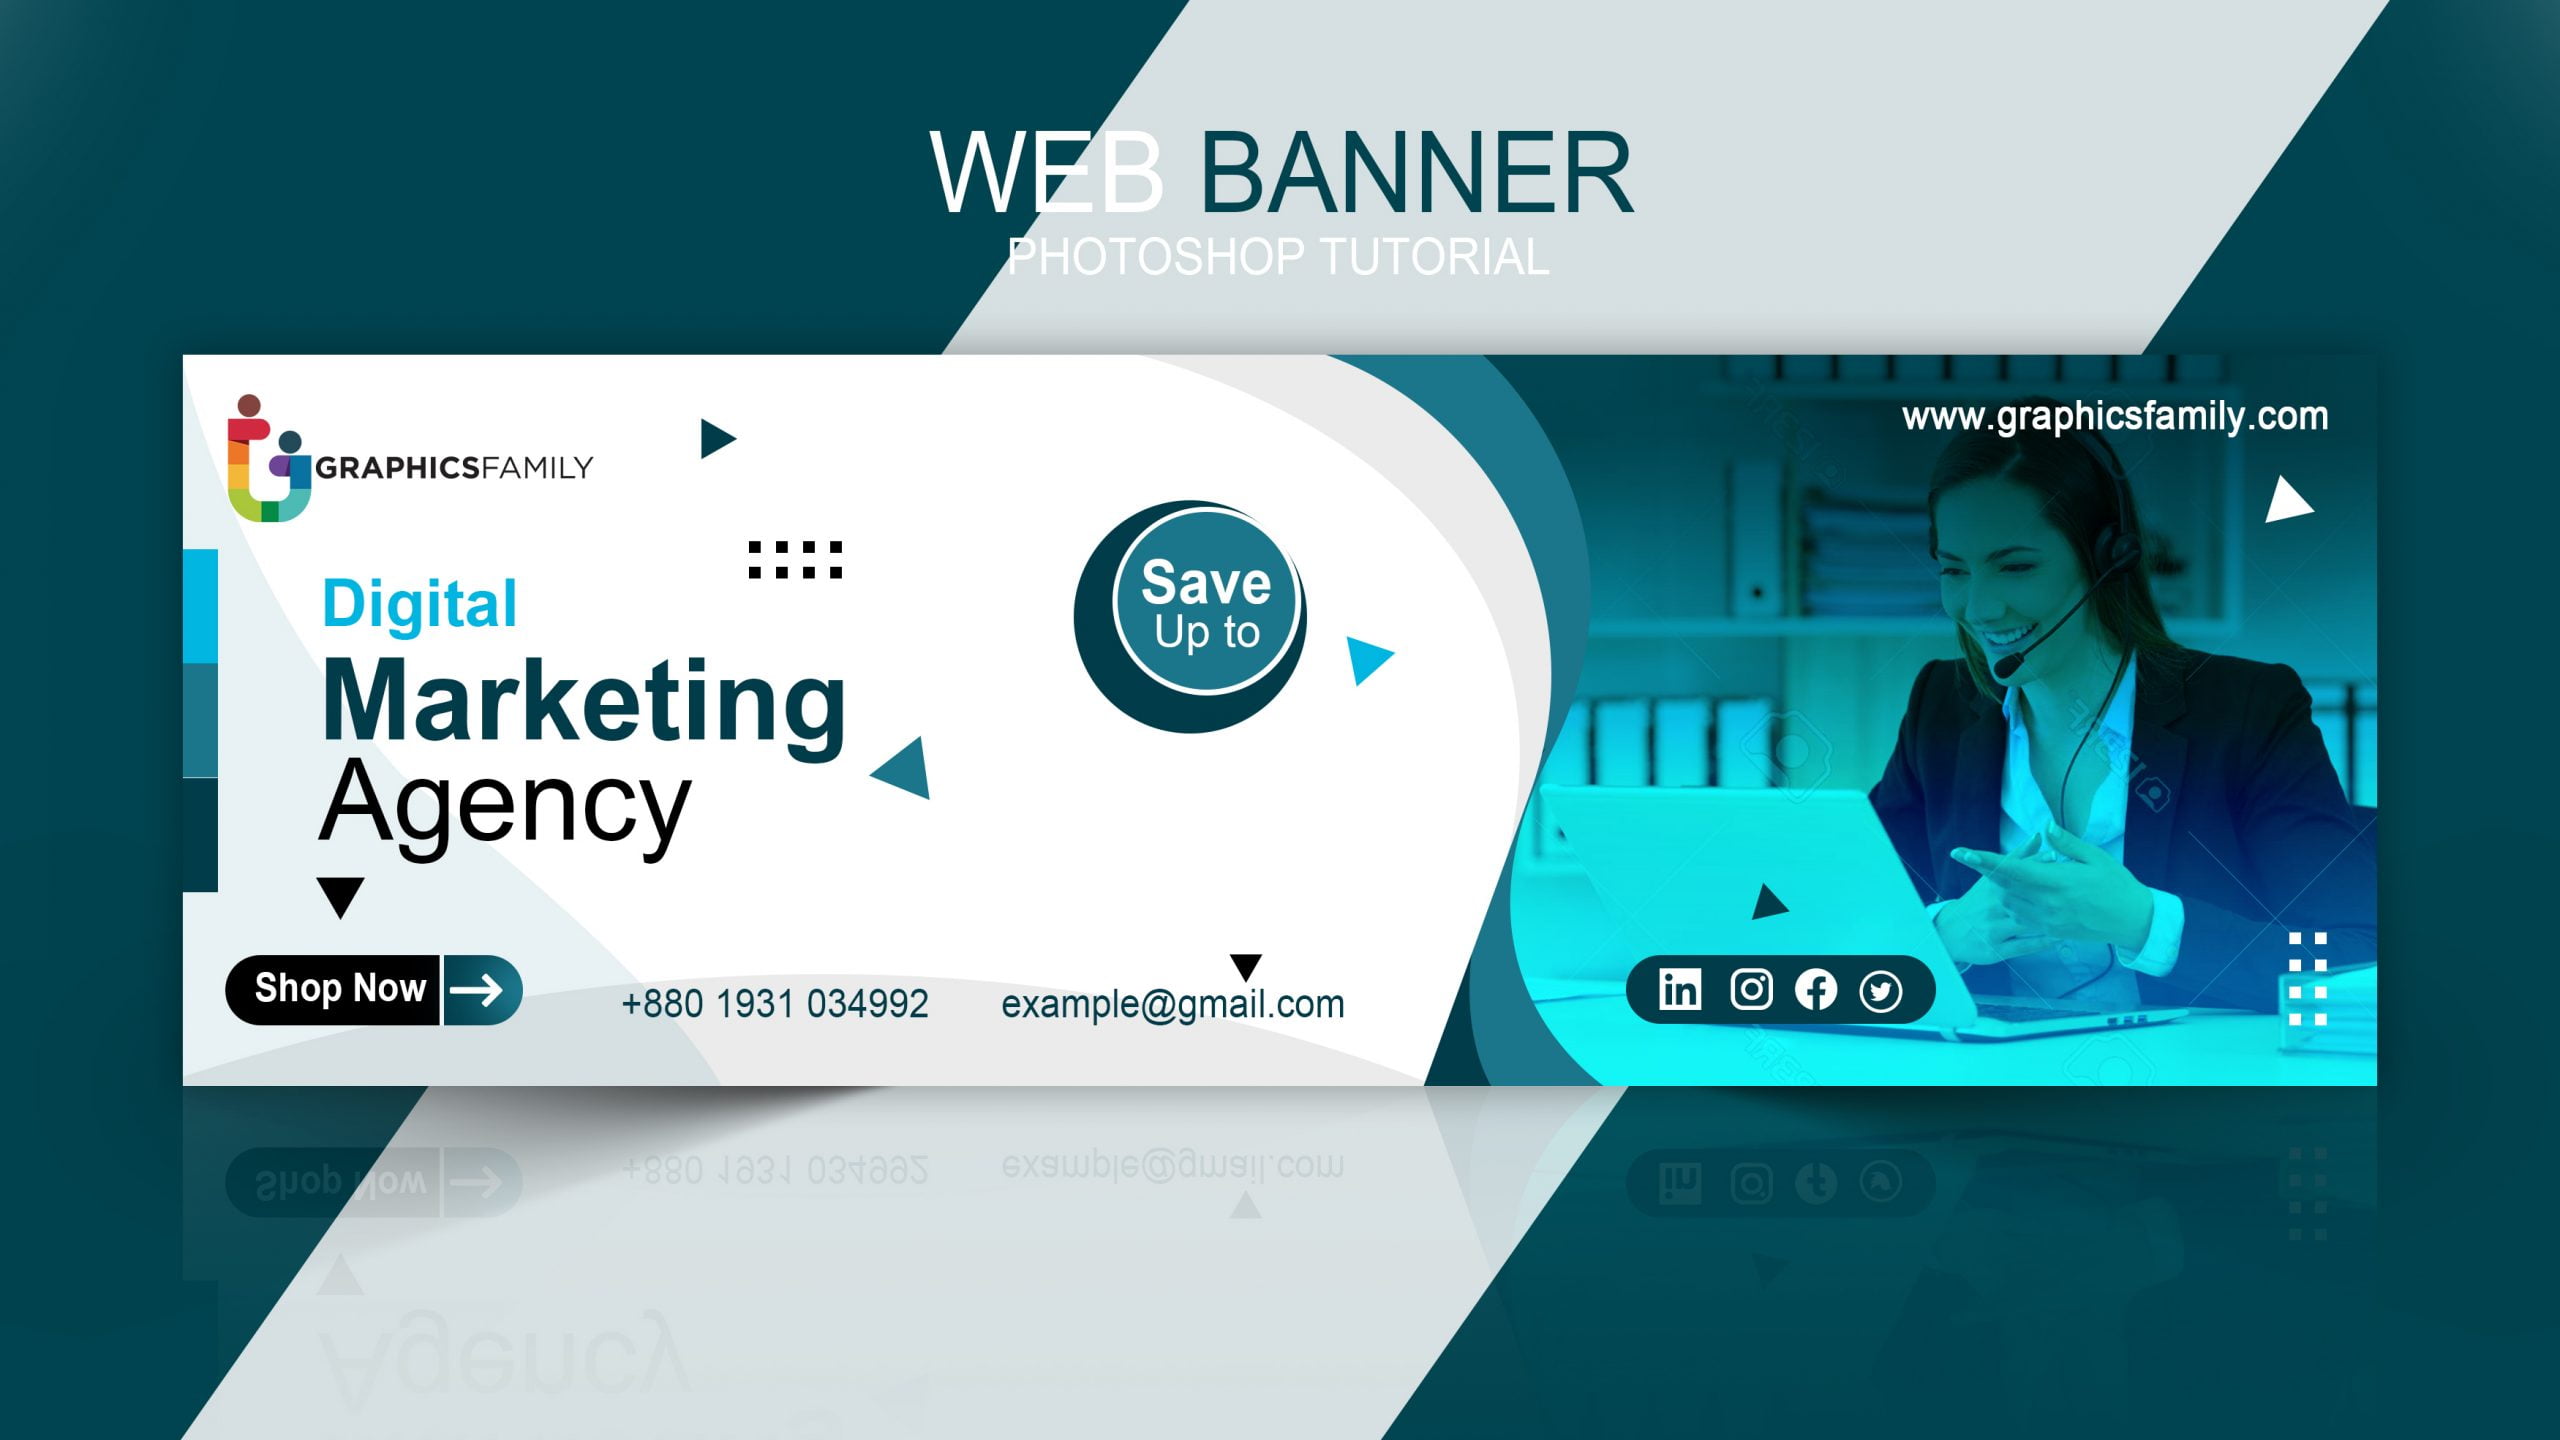 Free Banners Download: .PSD, .AI, .EPS - GraphicsFamily